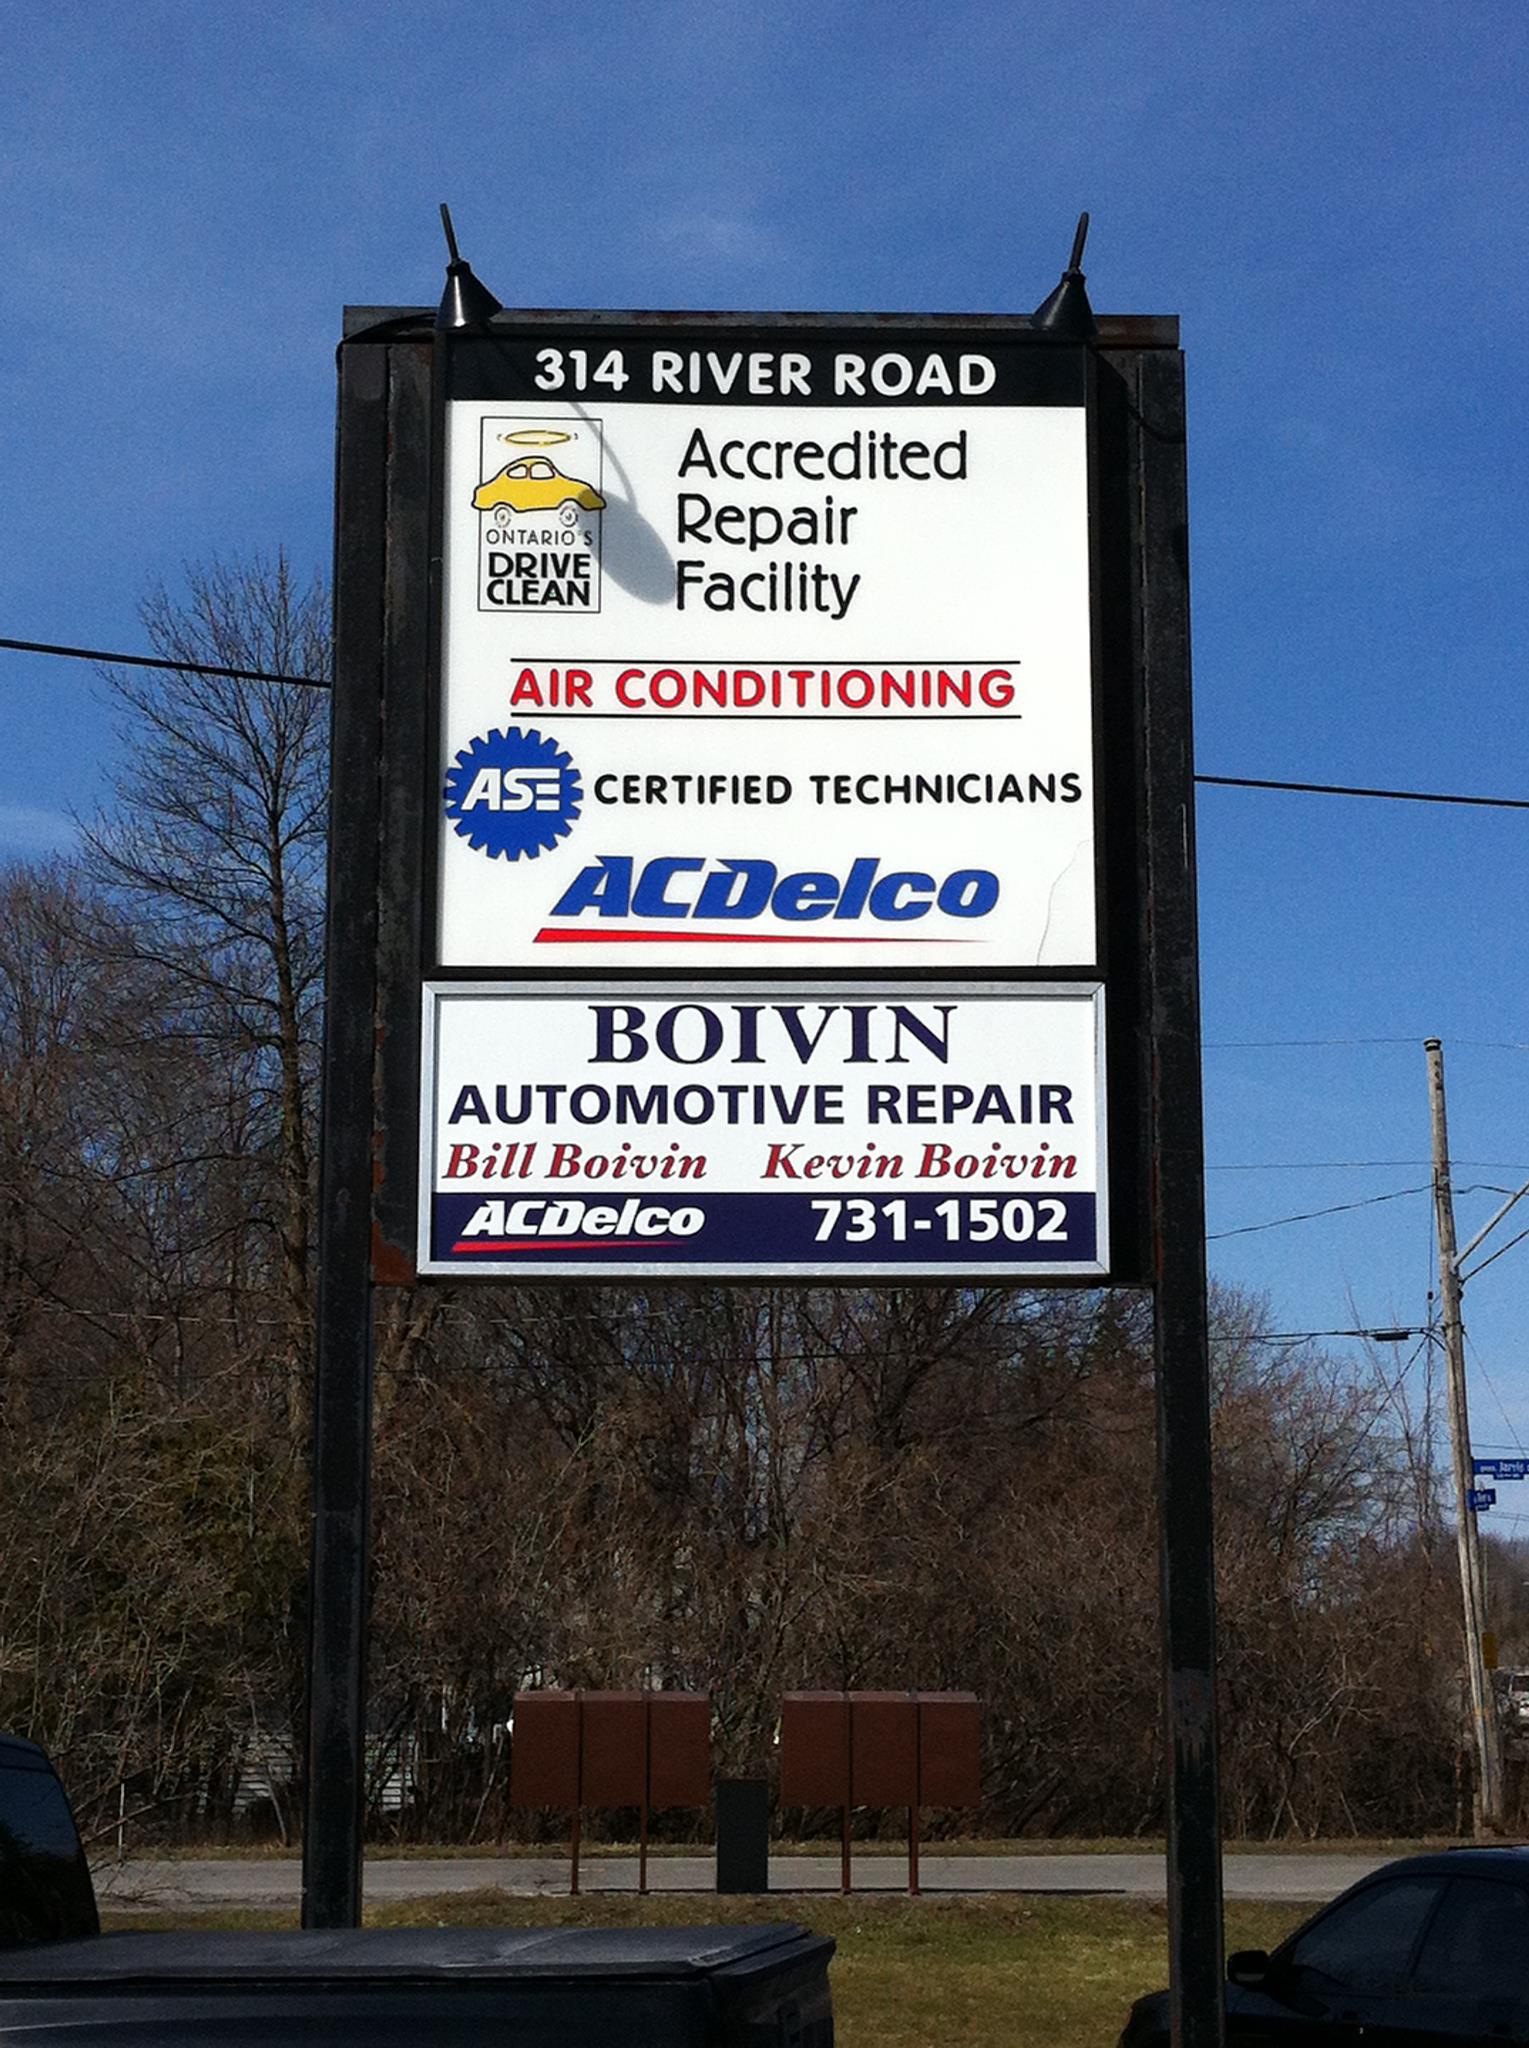 Boivin Automotive Repair 6580 Fourth Line Rd, North Gower Ontario K0A 2T0